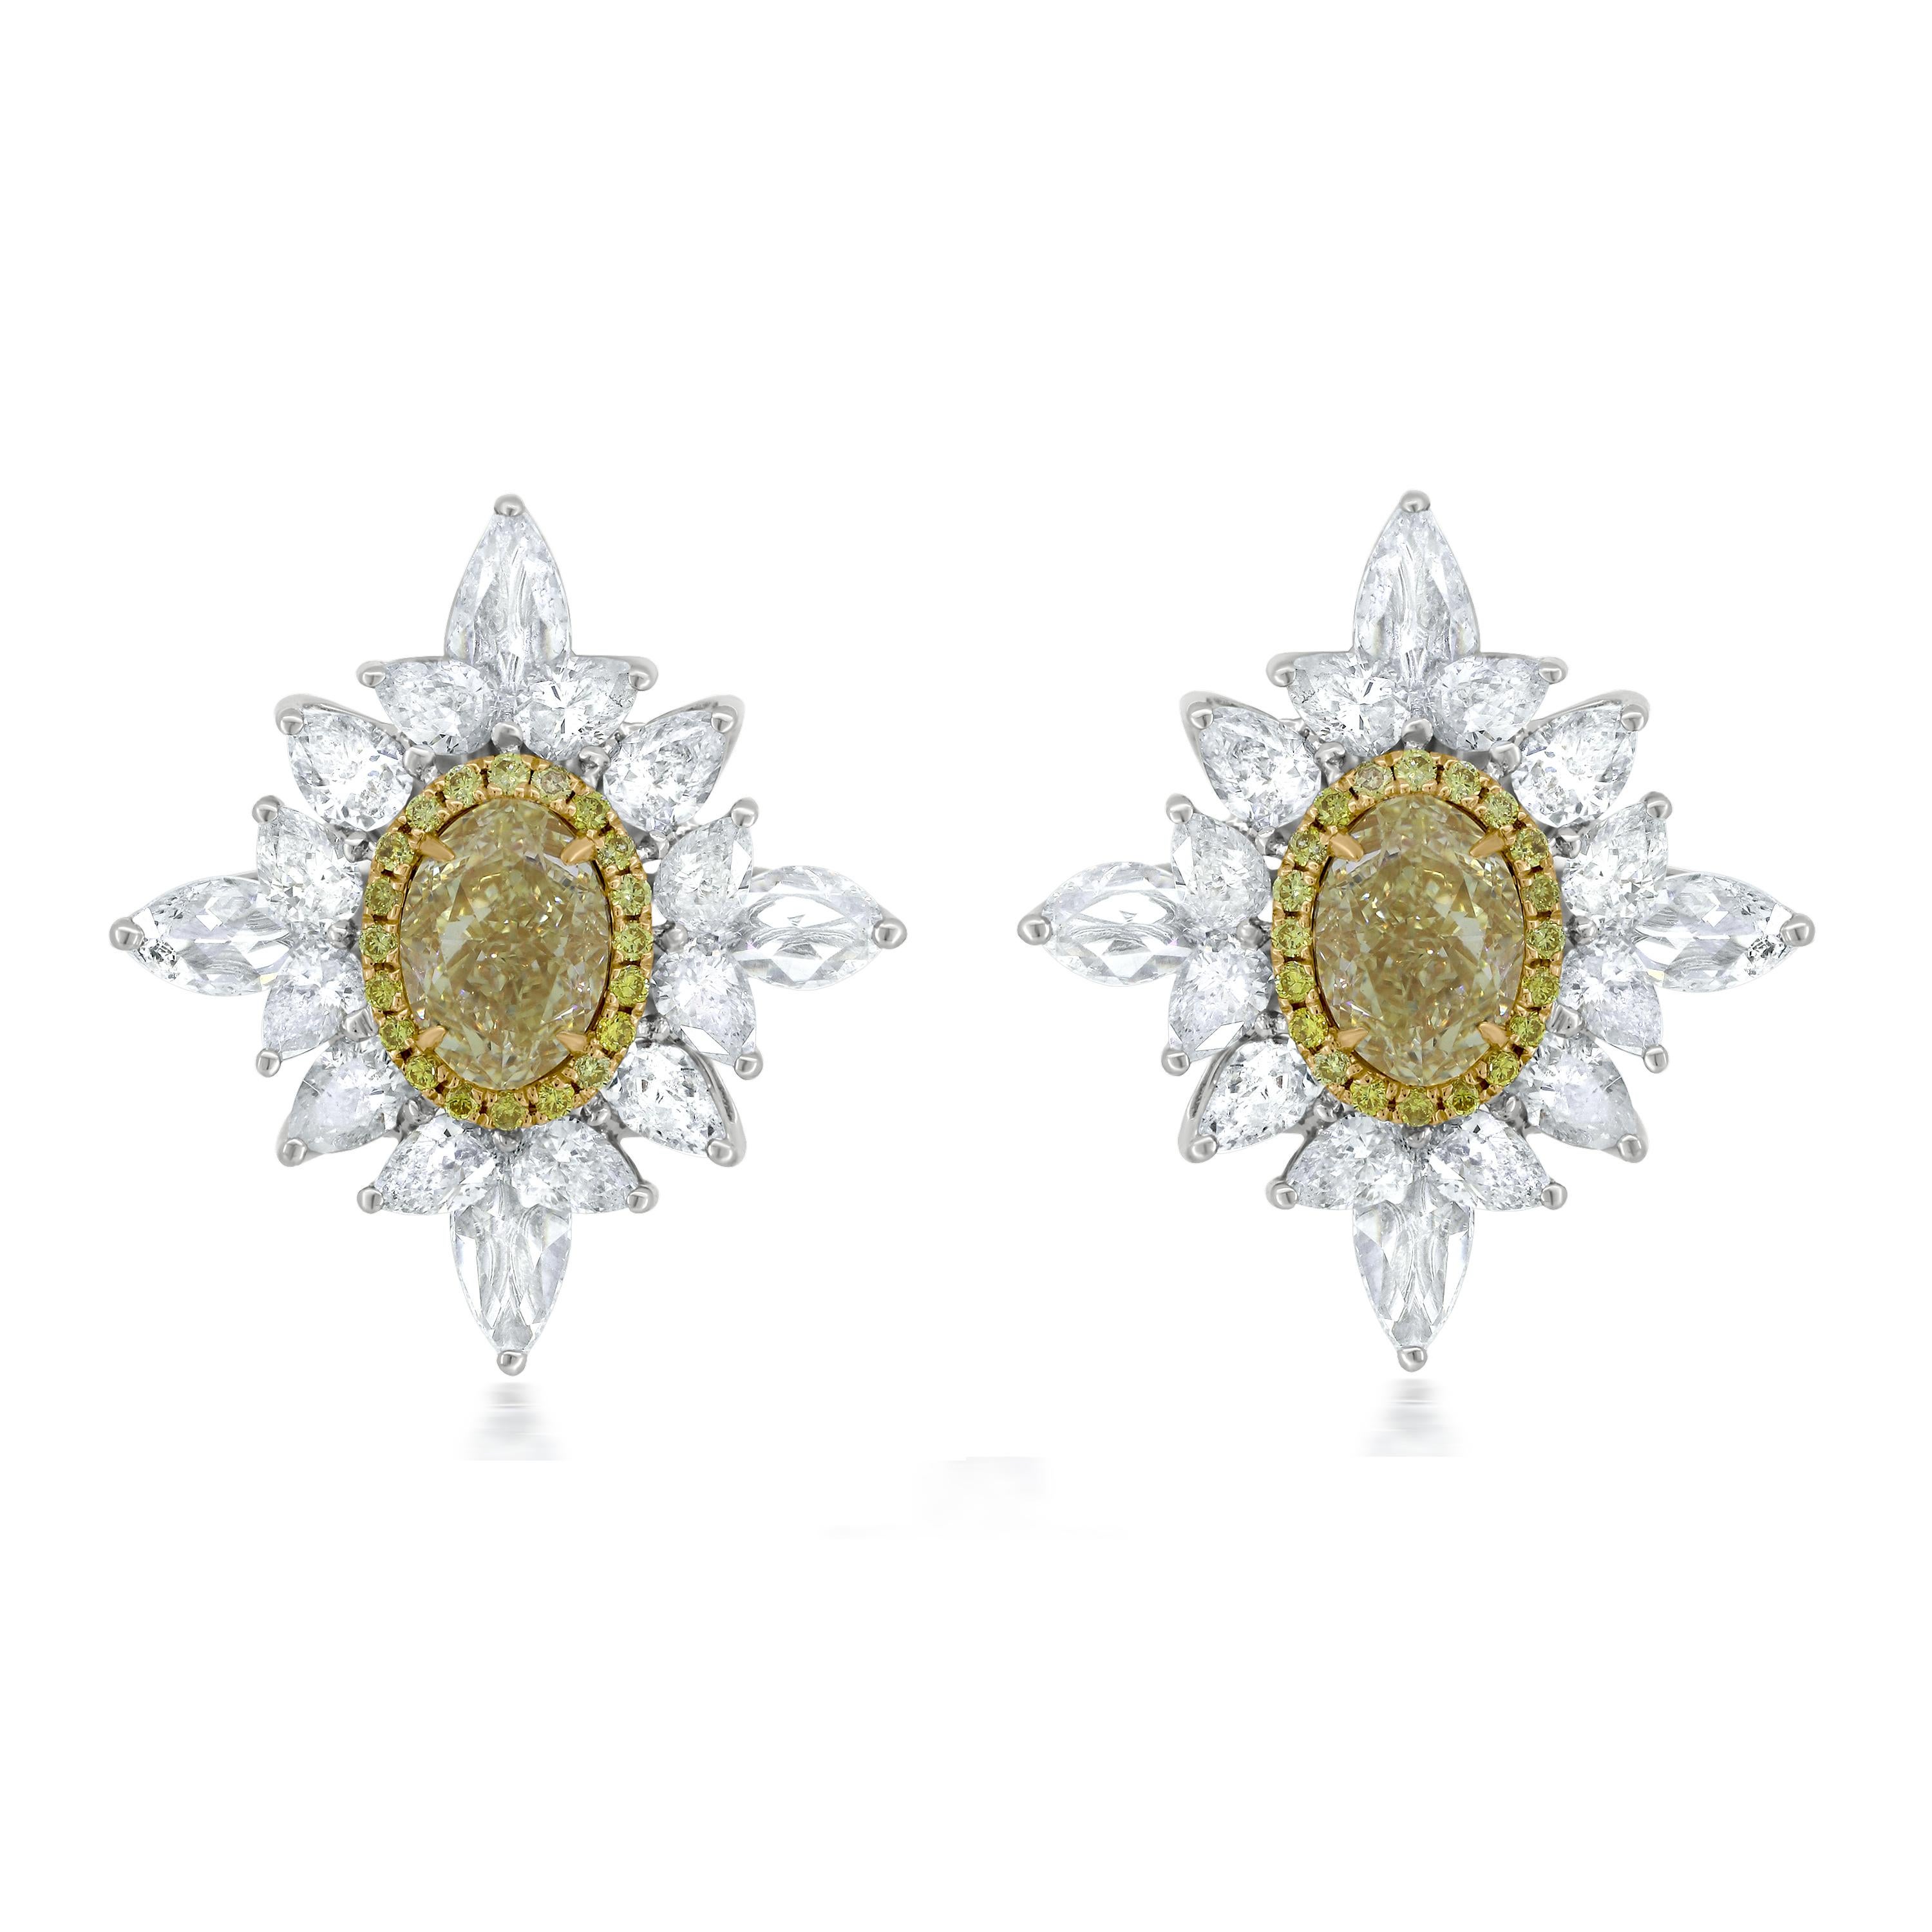 These Nigaam 18k white and yellow gold diamond earrings look elegant with 1.23 carats oval-shaped yellow diamond centerpiece. The center yellow diamonds are gracefully surrounded by pear-shaped white diamonds that add shine and sparkle to your